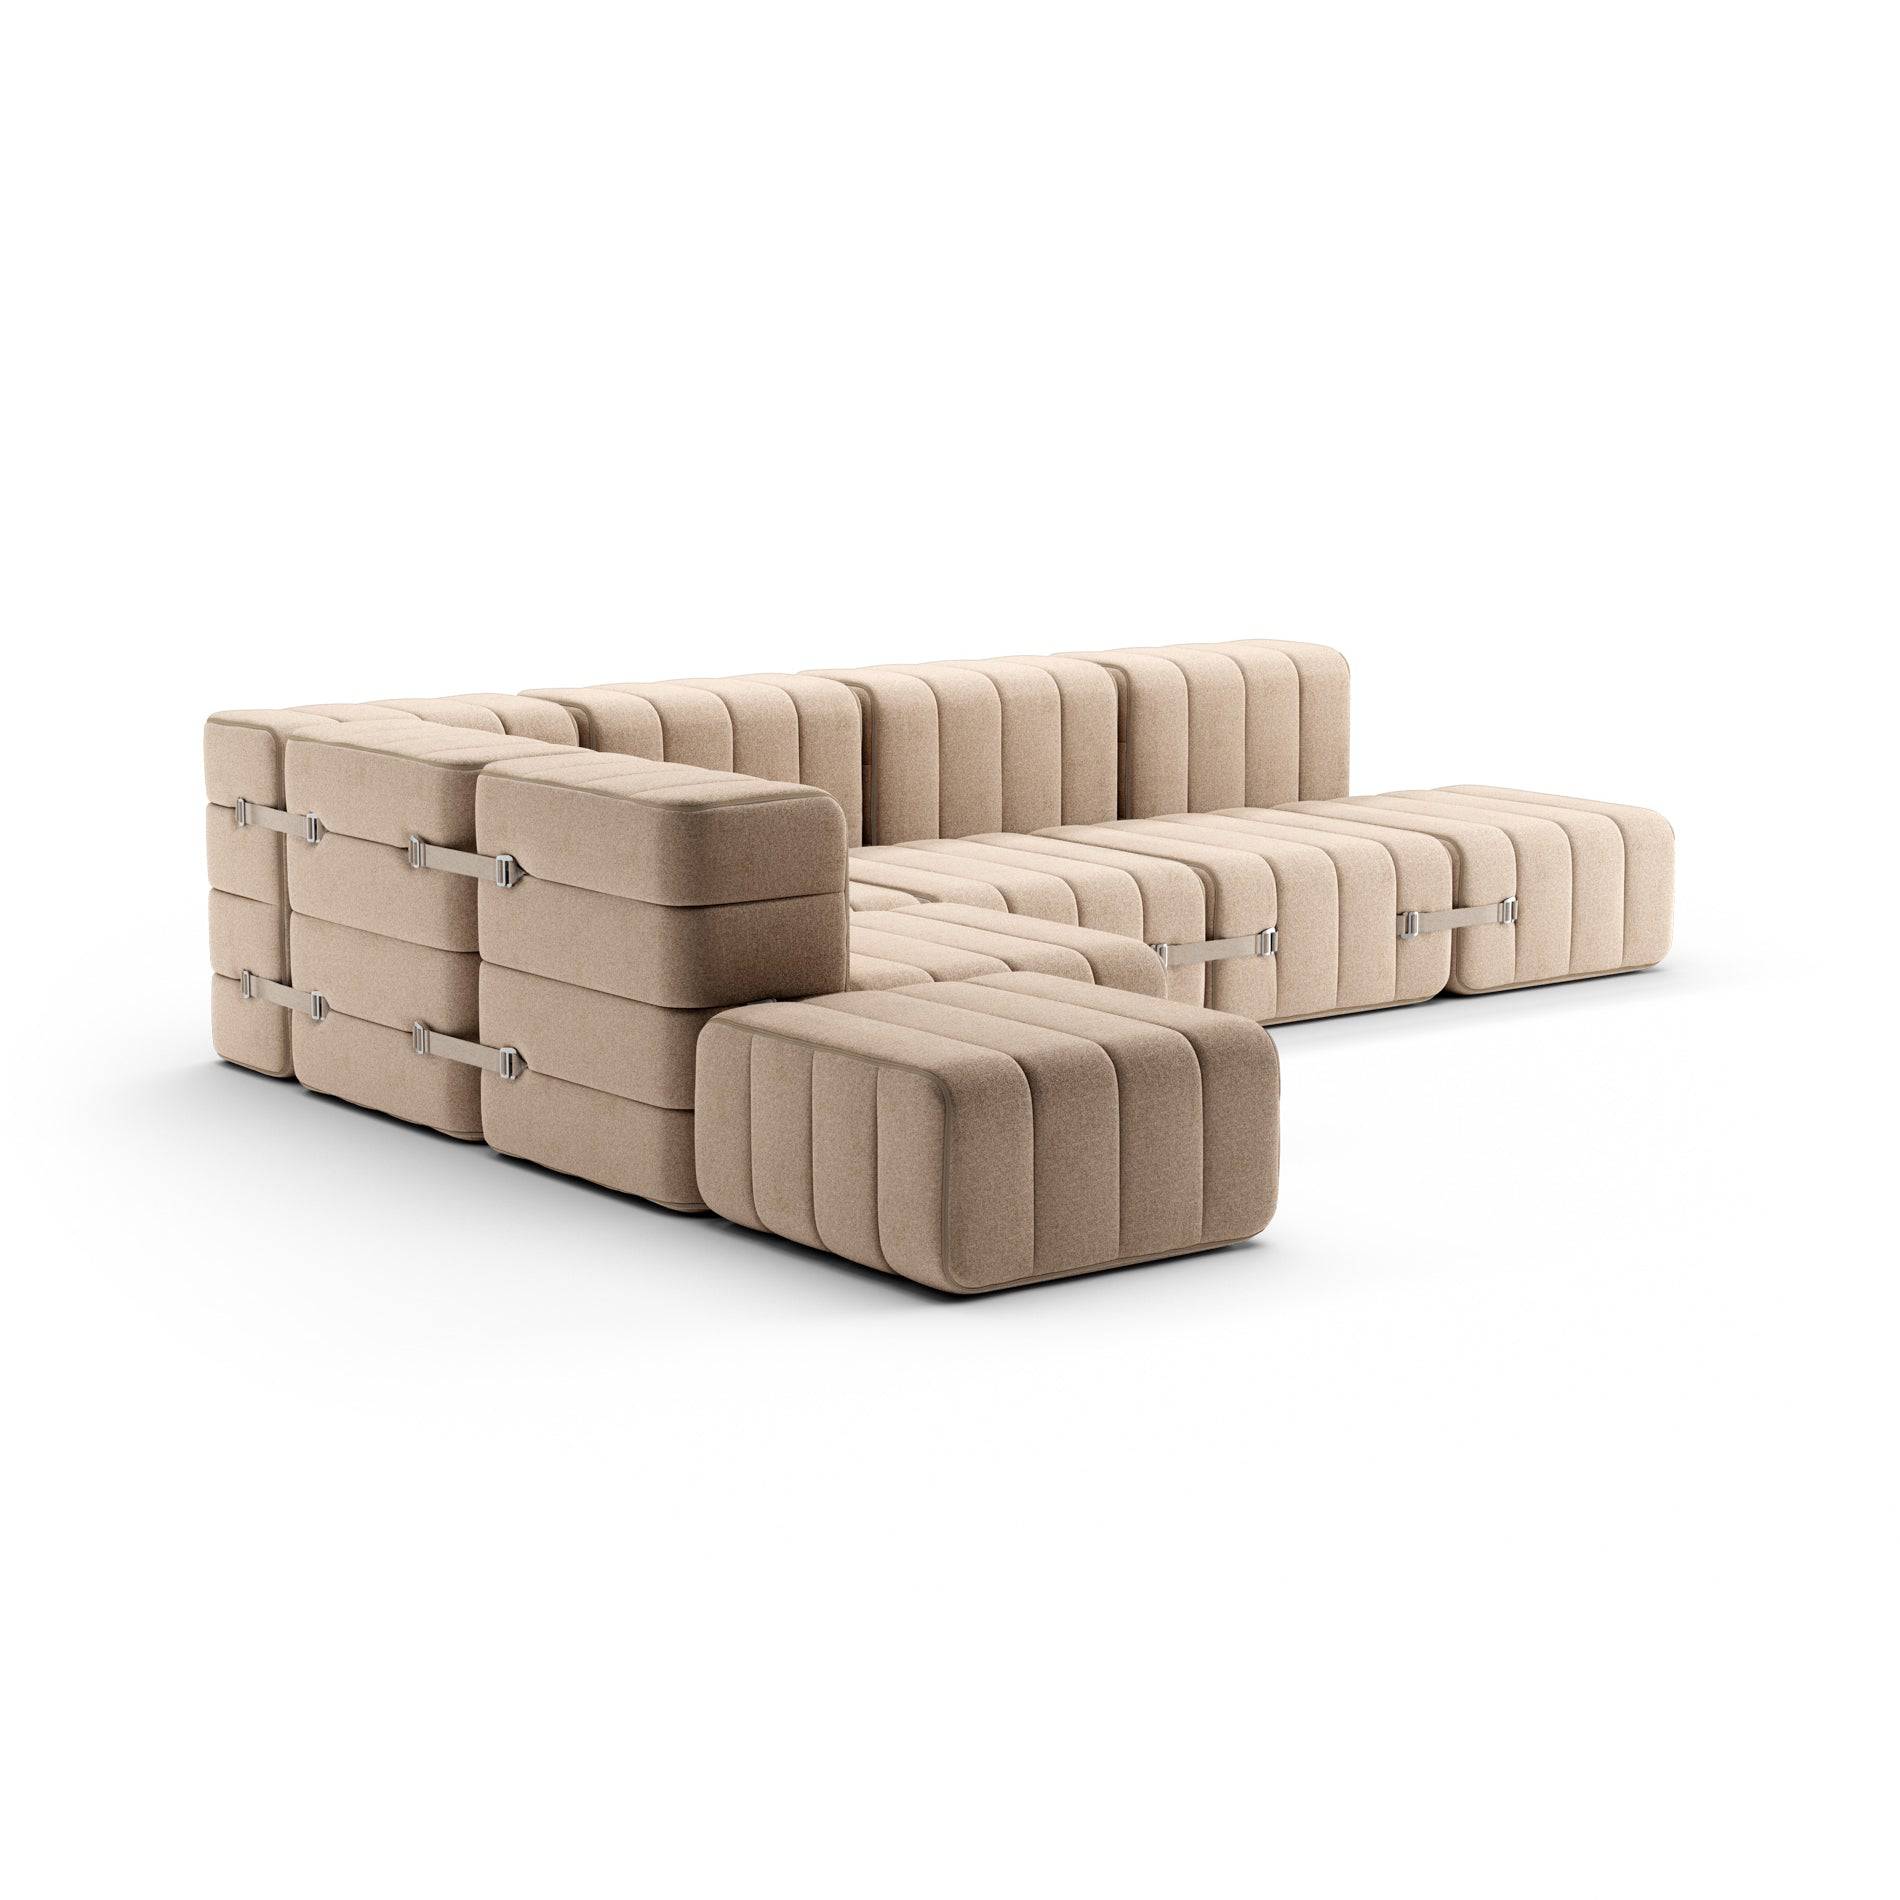 Curt Sofa System - Beige - THAT COOL LIVING